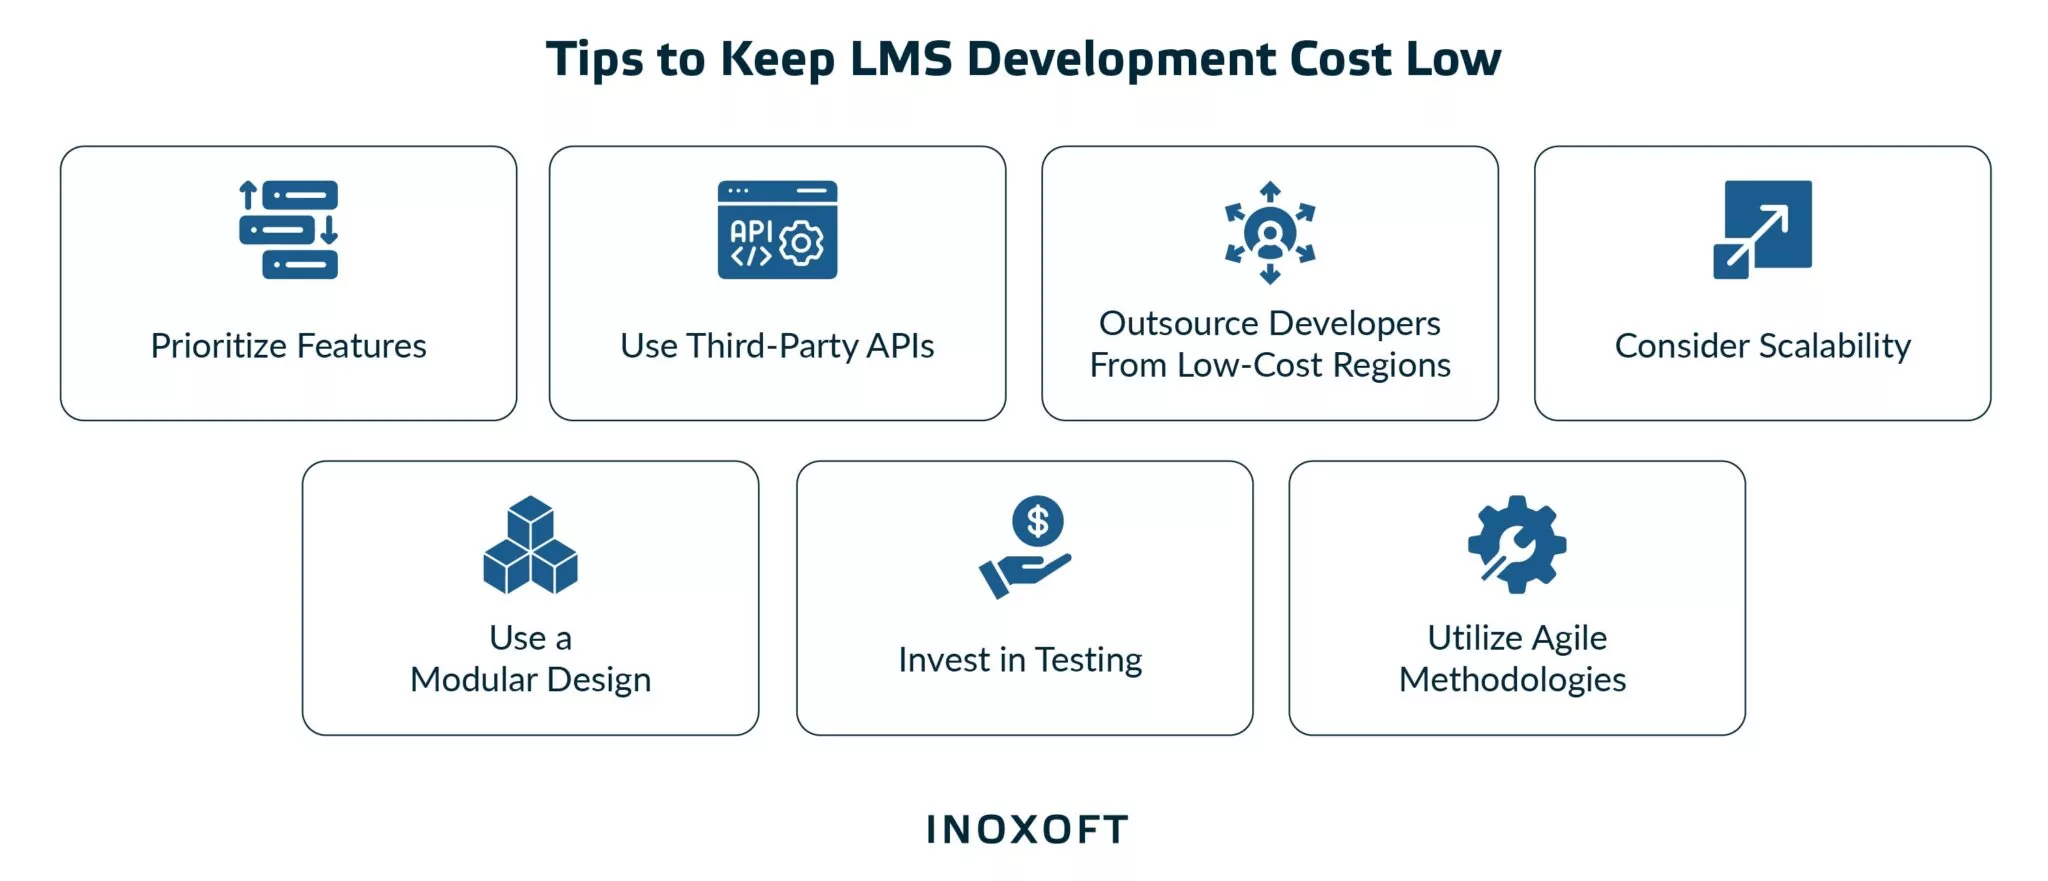 Tips to keep LMS development cost low